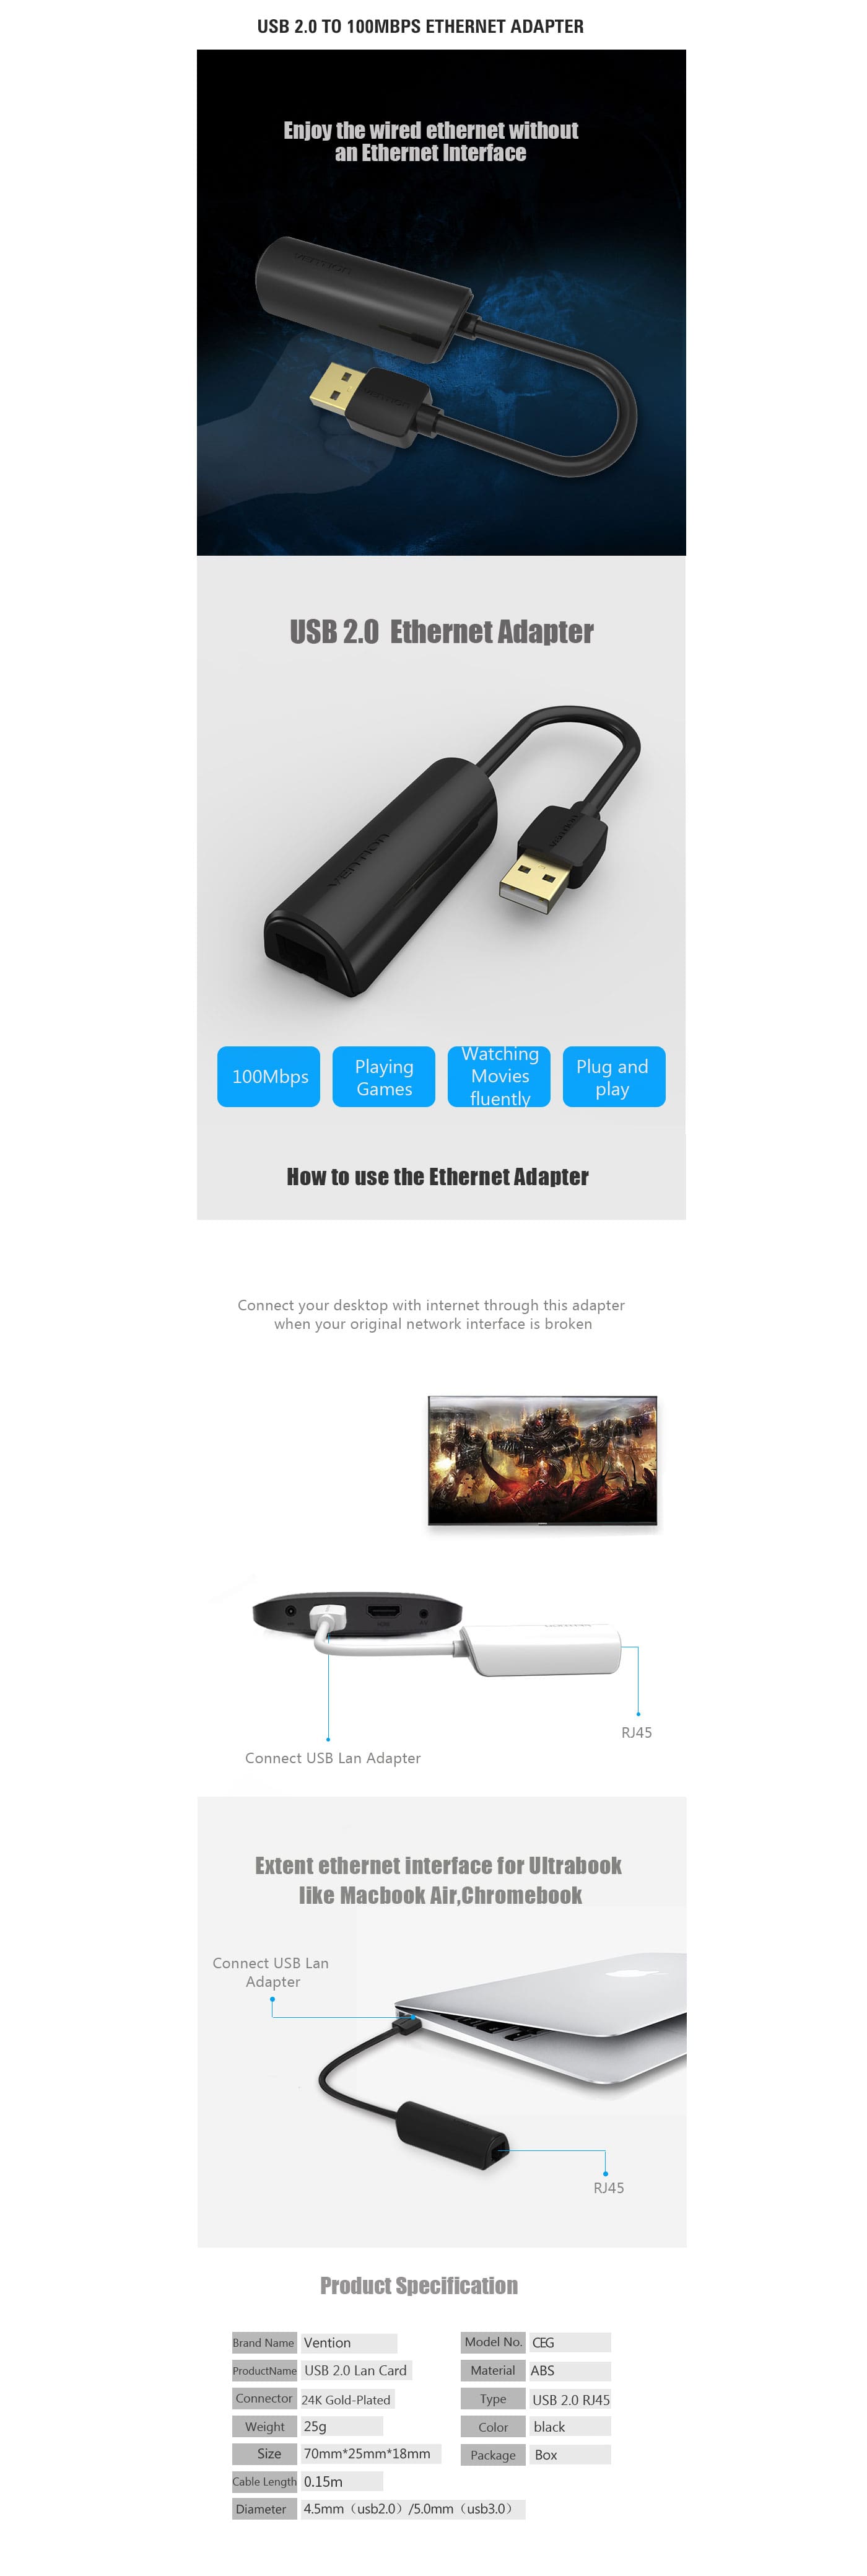 Vention USB 2.0 to 100Mbps Ethernet Adapter features